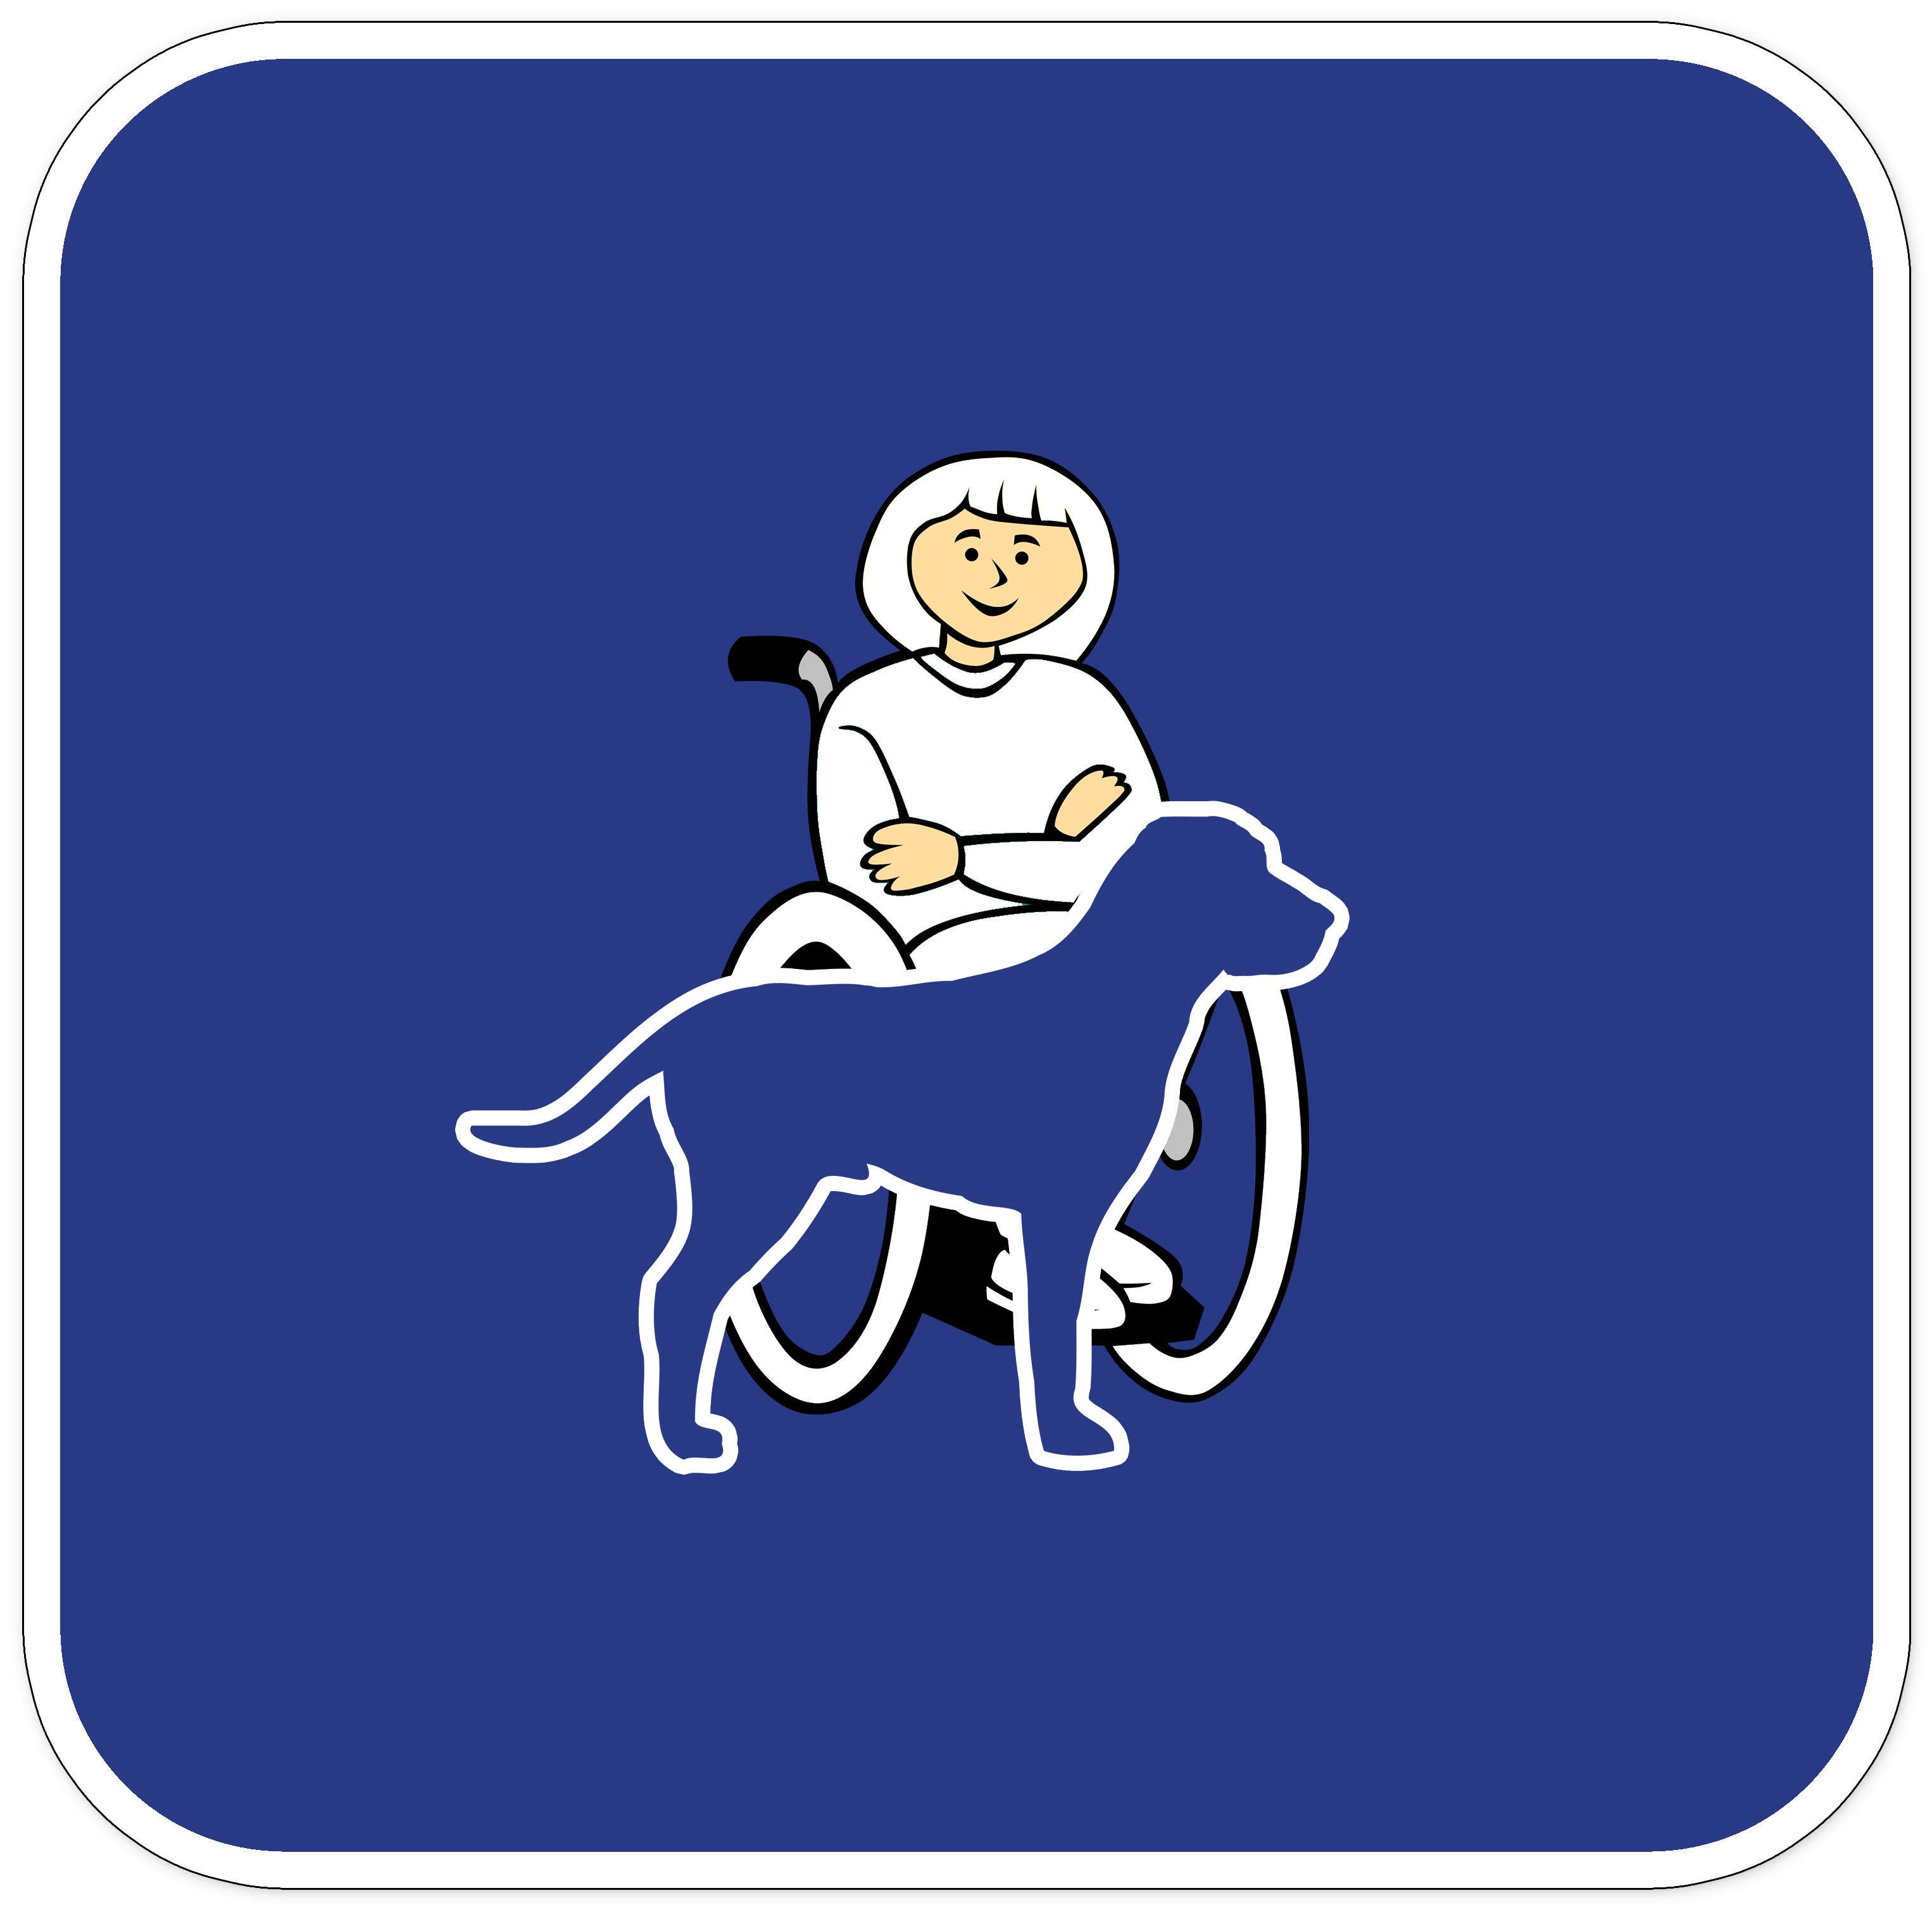 Companion dog for disable people free image download